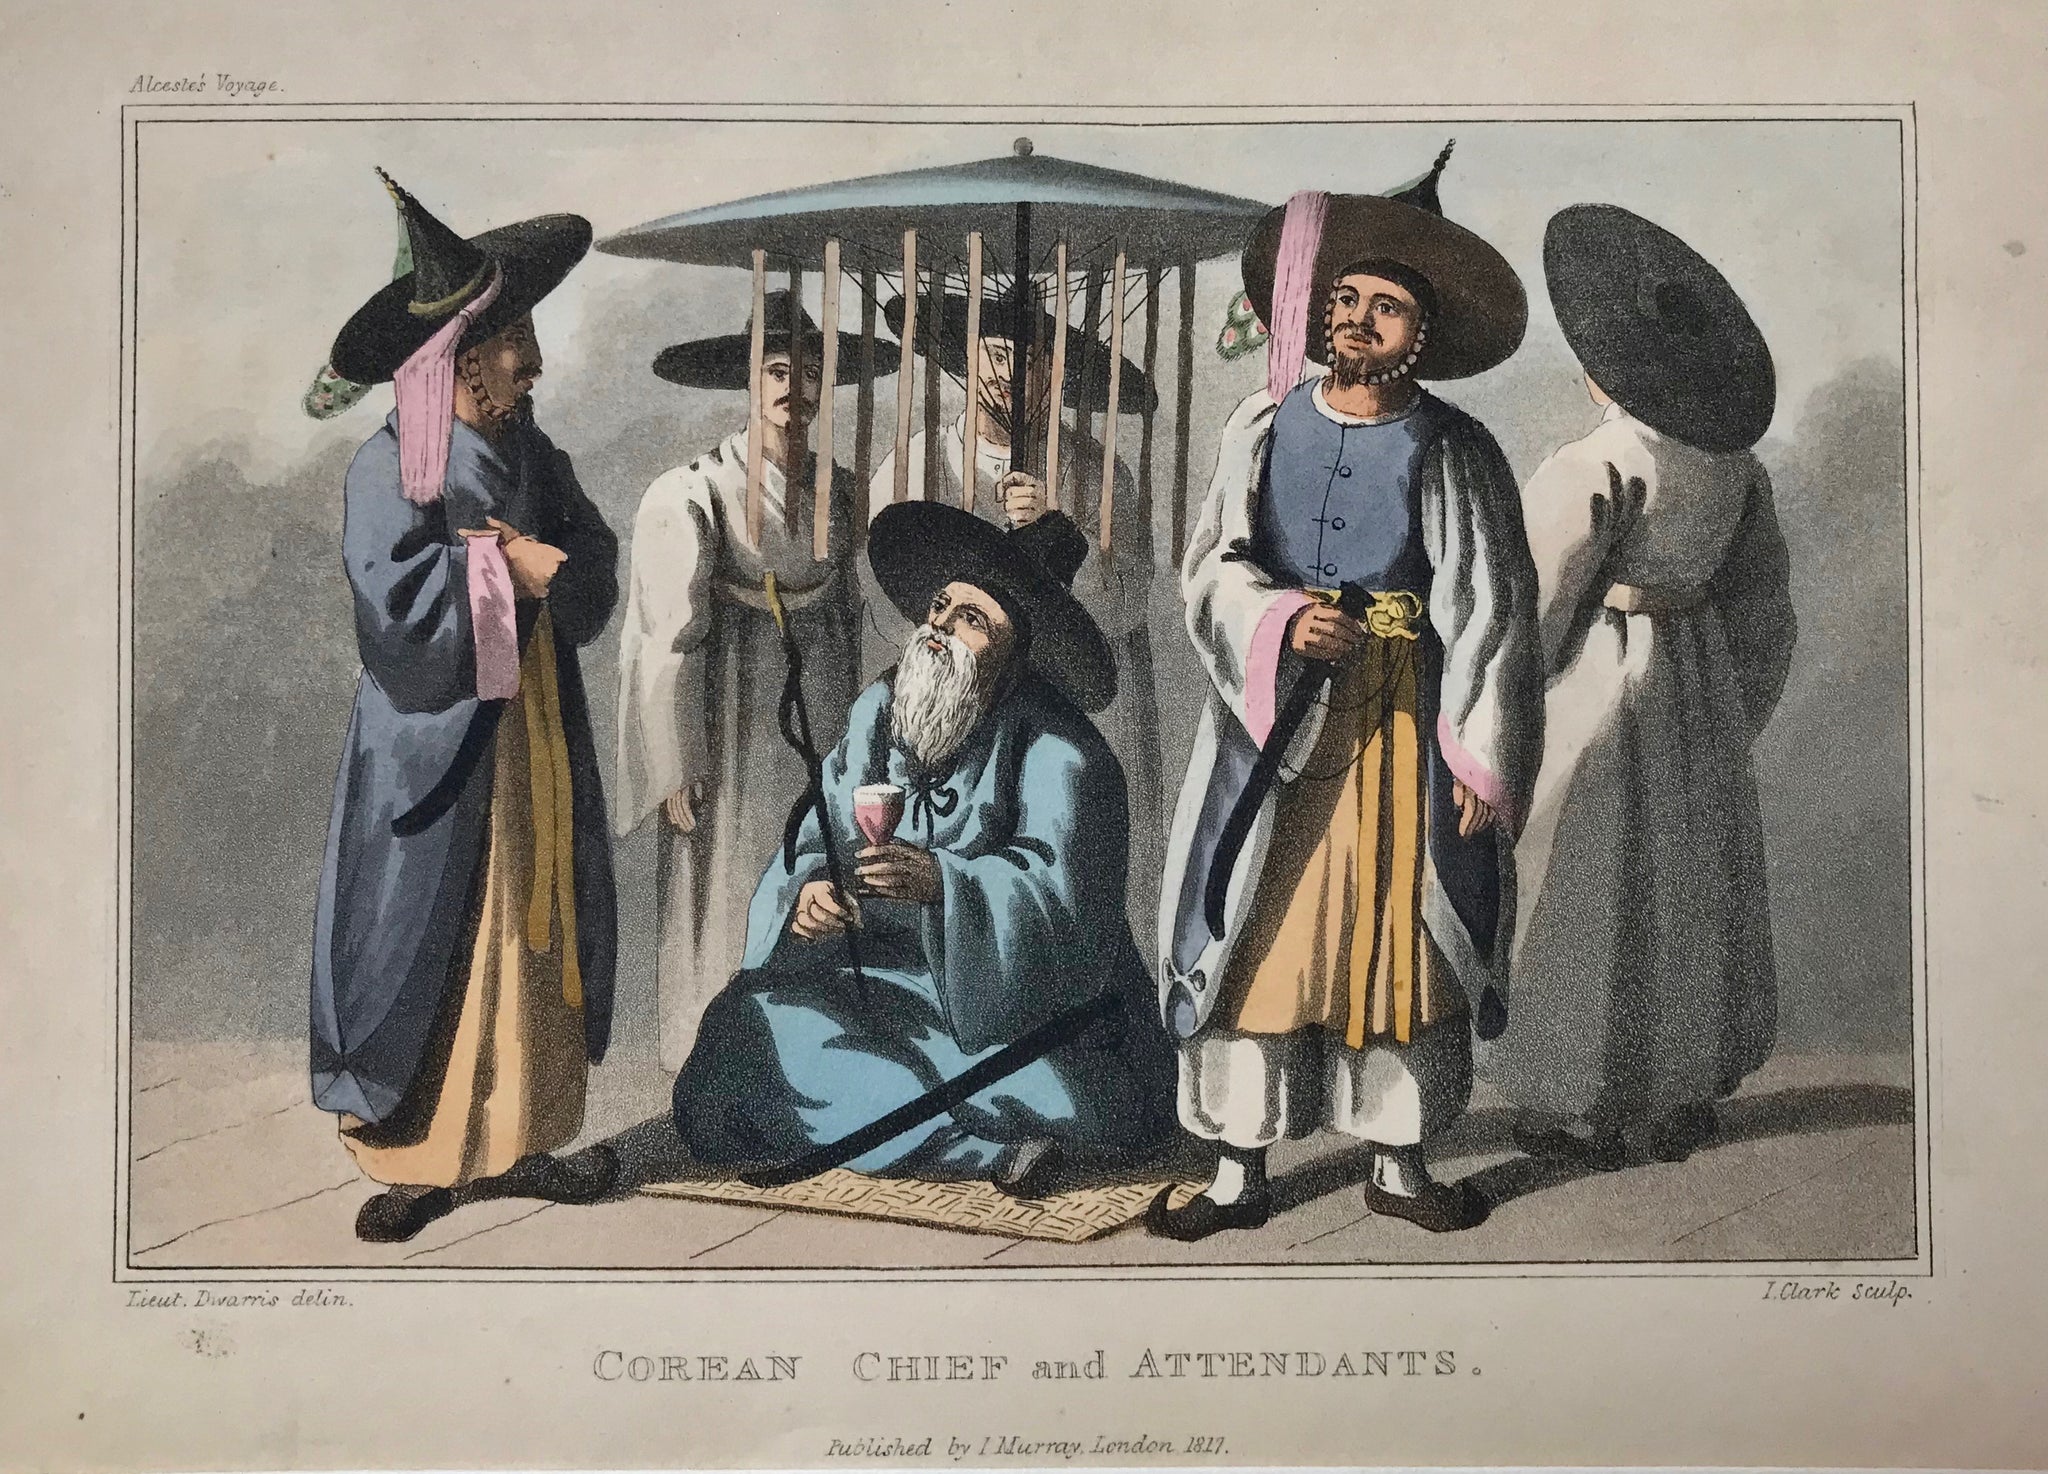 Corean Chief and Attendants  Original hand-colored aquatint by I. Clark after Lt. Dwarris. Published in London, 1817.